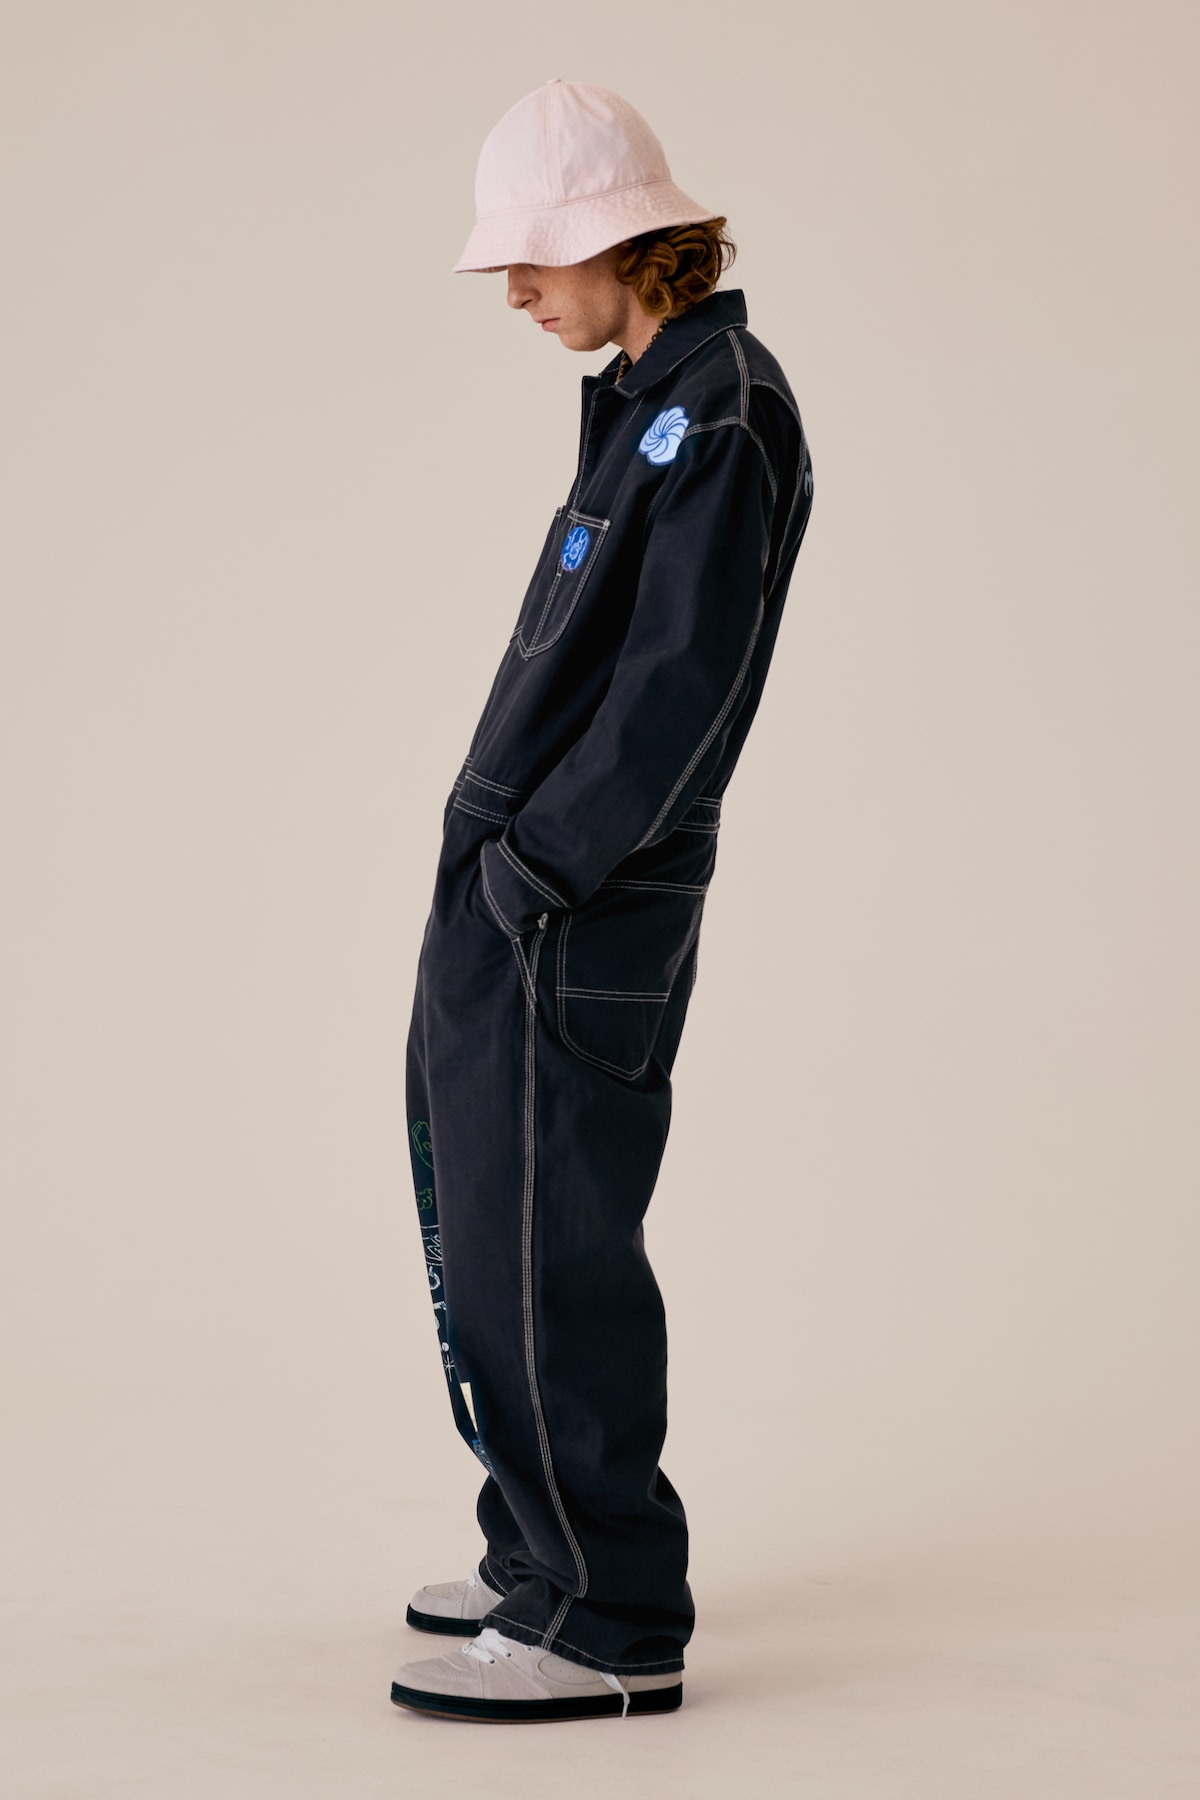 Weekday x Lee 90s Denim Collection Lookbook Drop Jeans Workwear Inspired Collaboration Exclusive